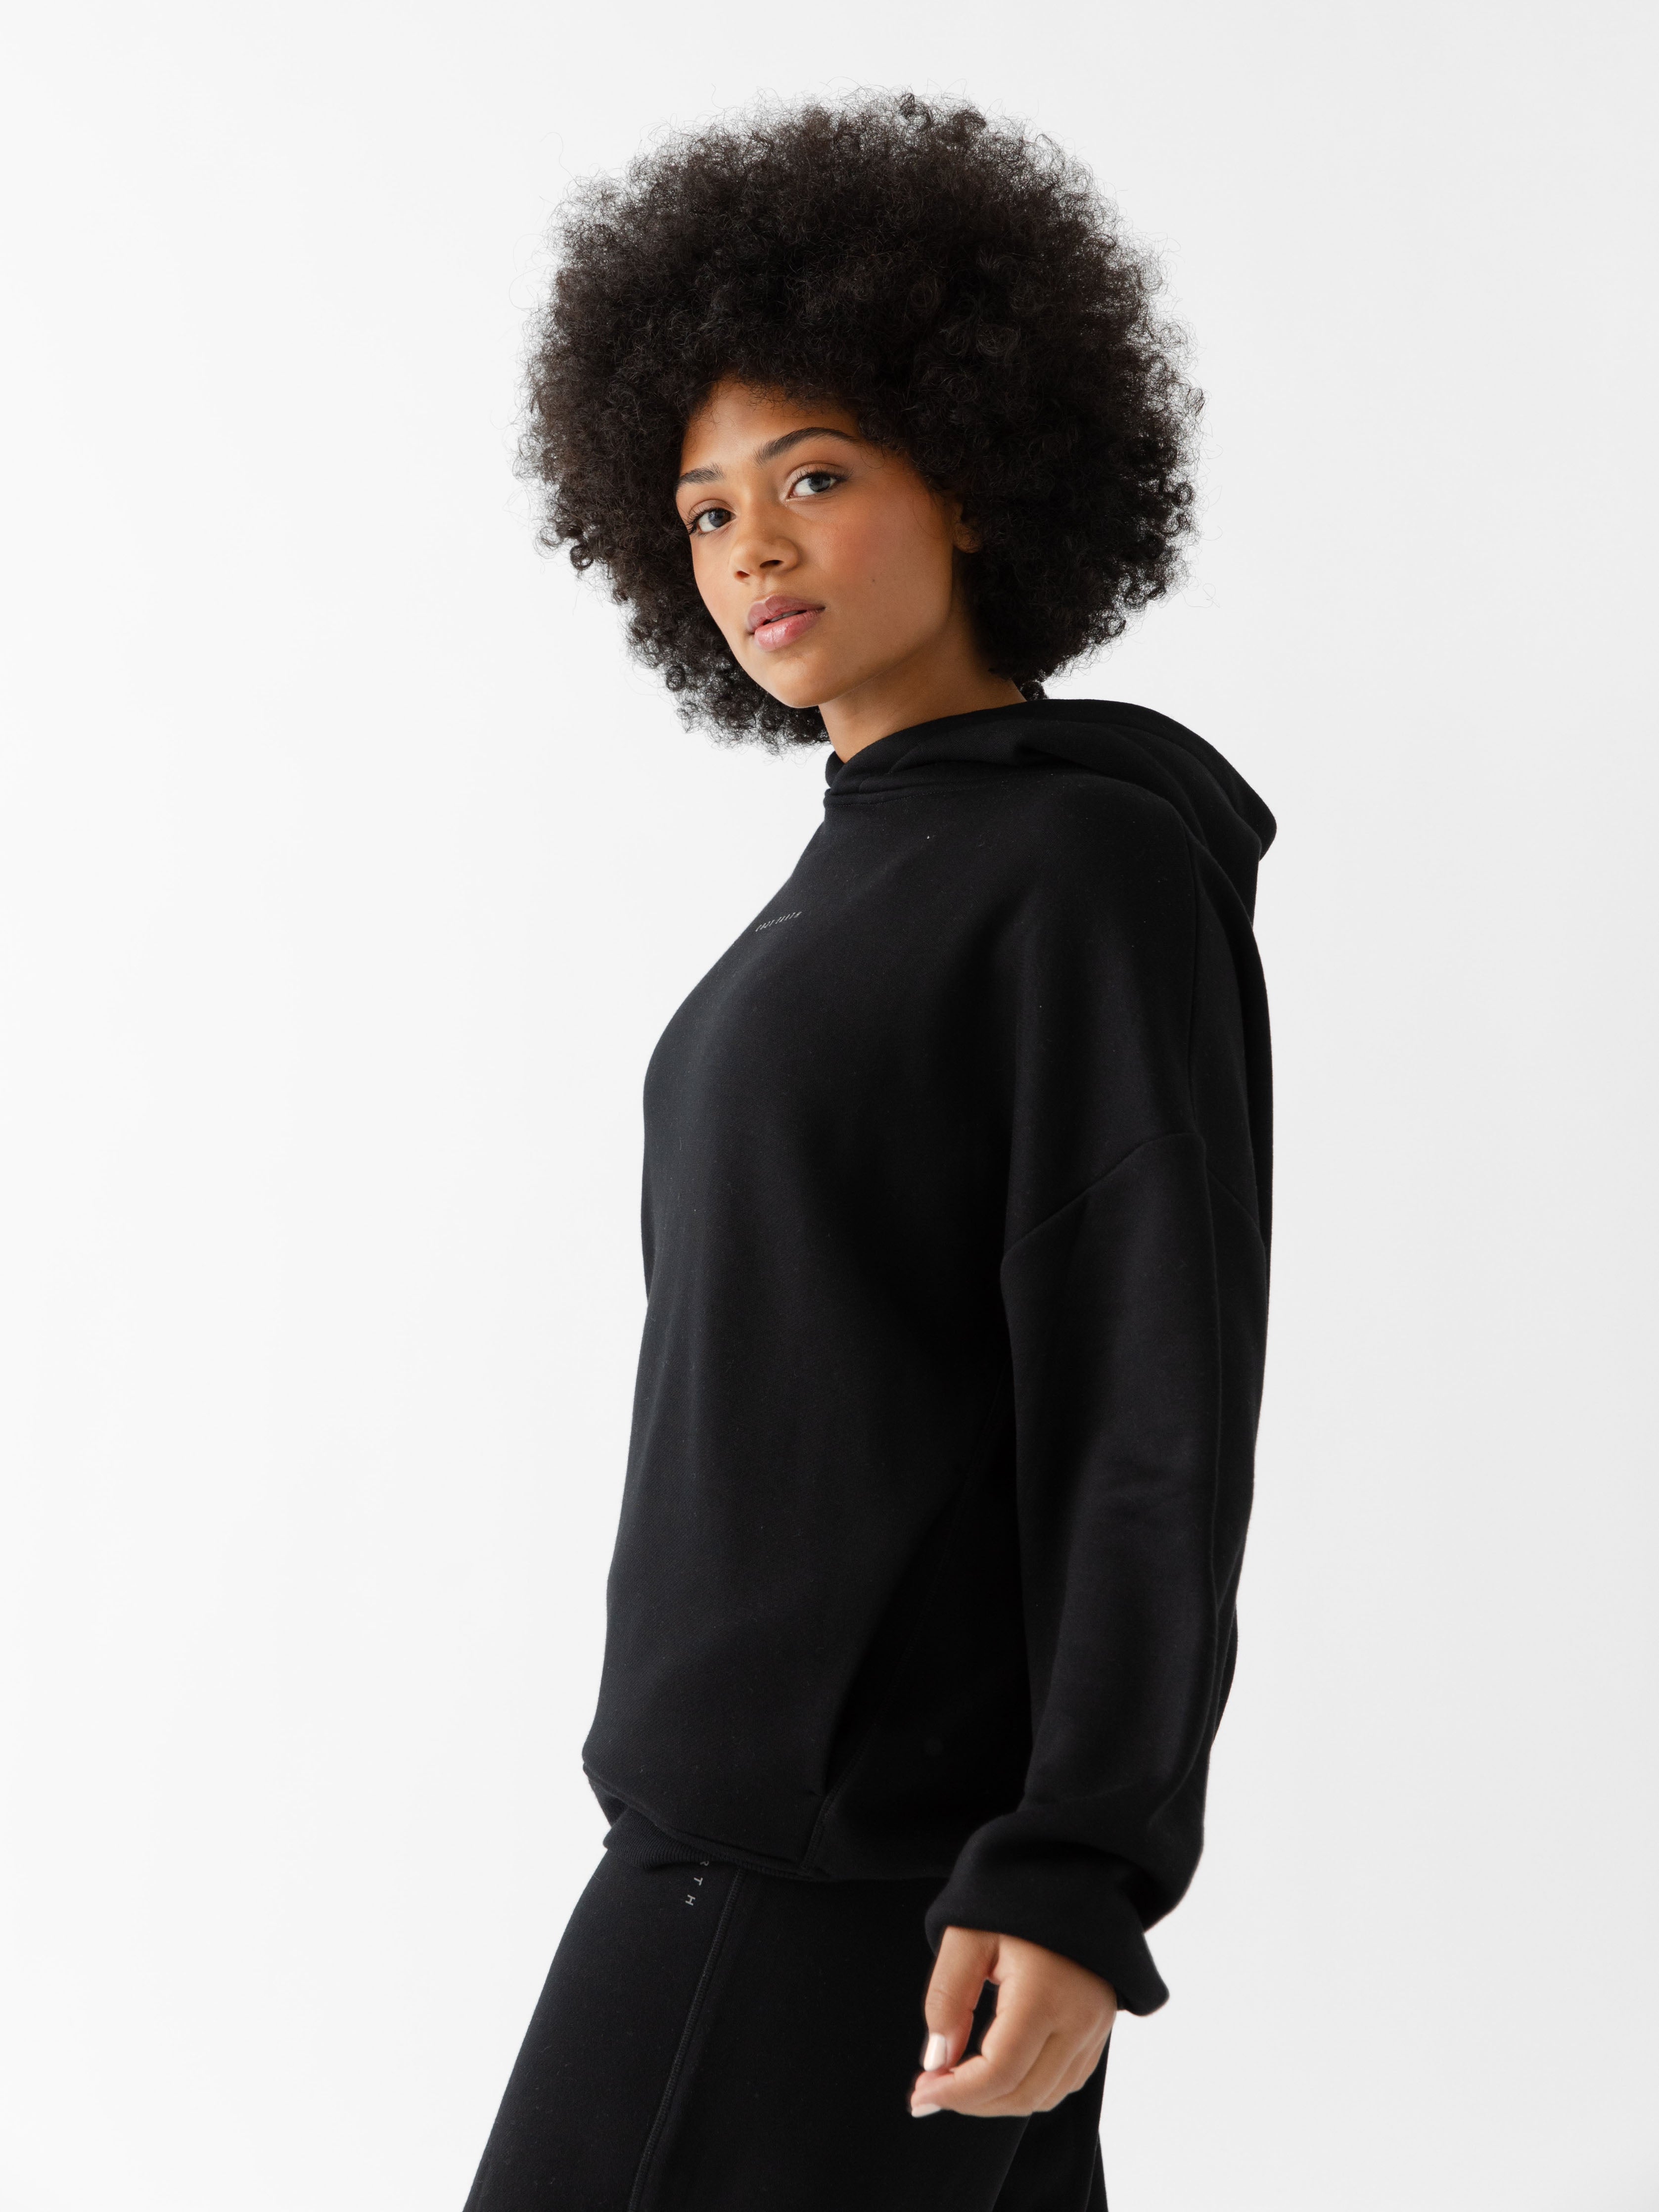 Woman wearing black cityscape hoodie with white background |Color:Black